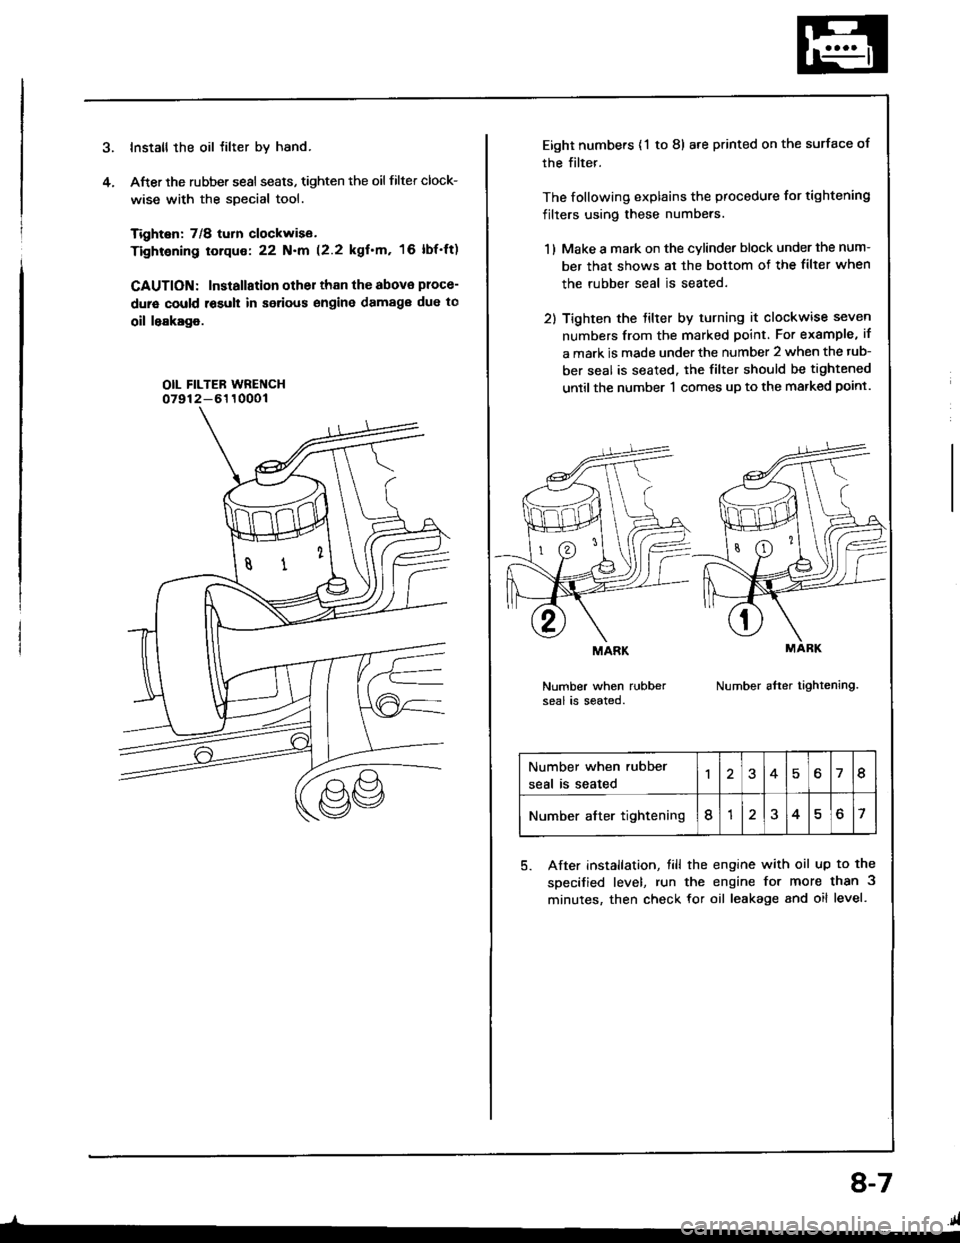 ACURA INTEGRA 1994  Service Repair Manual Install the oil tilter by hand.
After the rubber sesl seats, tighten the oil filter clock-
wise with the special tool.
Tighten: 7/8 turn clockwise.
Tightening torque: 22 N.m (2.2 kgfm, 16 lbfft)
CAU